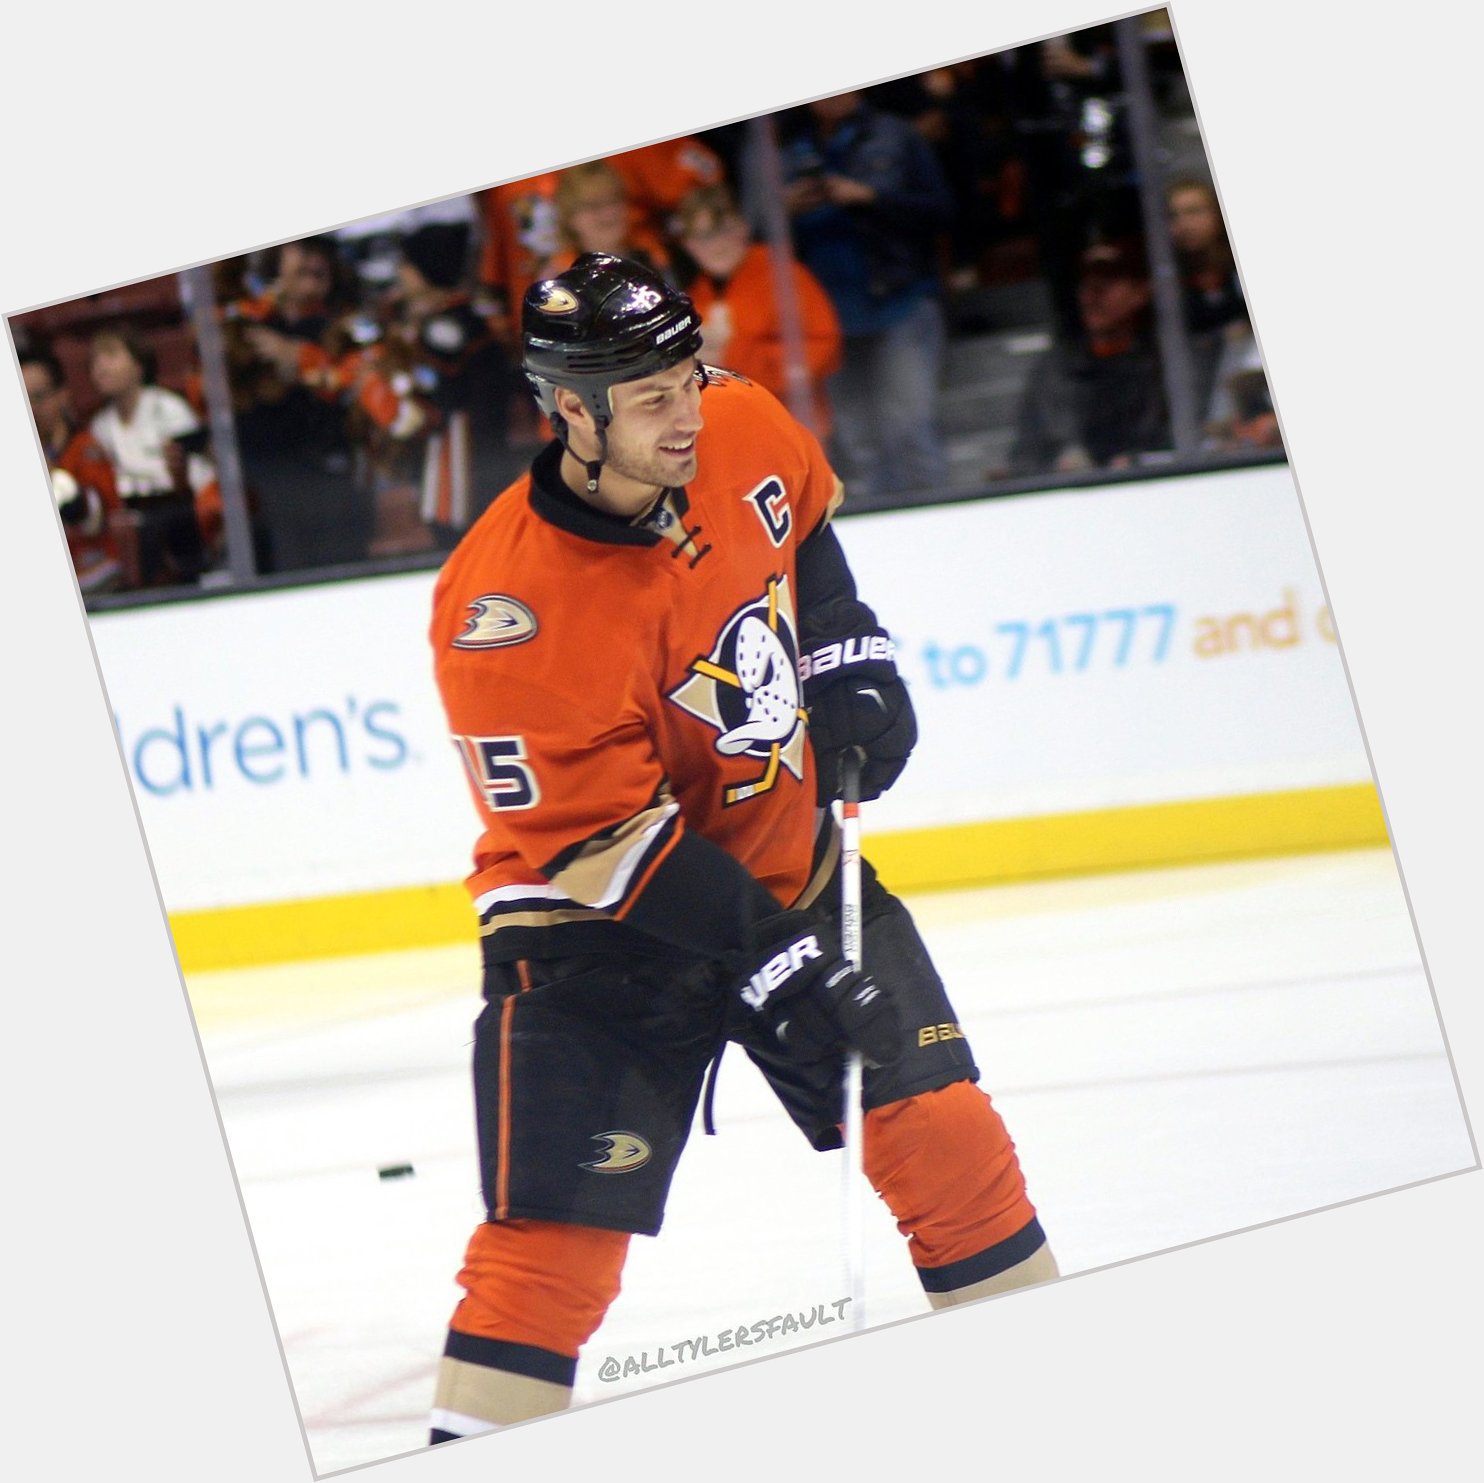 Happy birthday, Ryan Getzlaf!!      I think a big fat WIN would be the perfect birthday present 